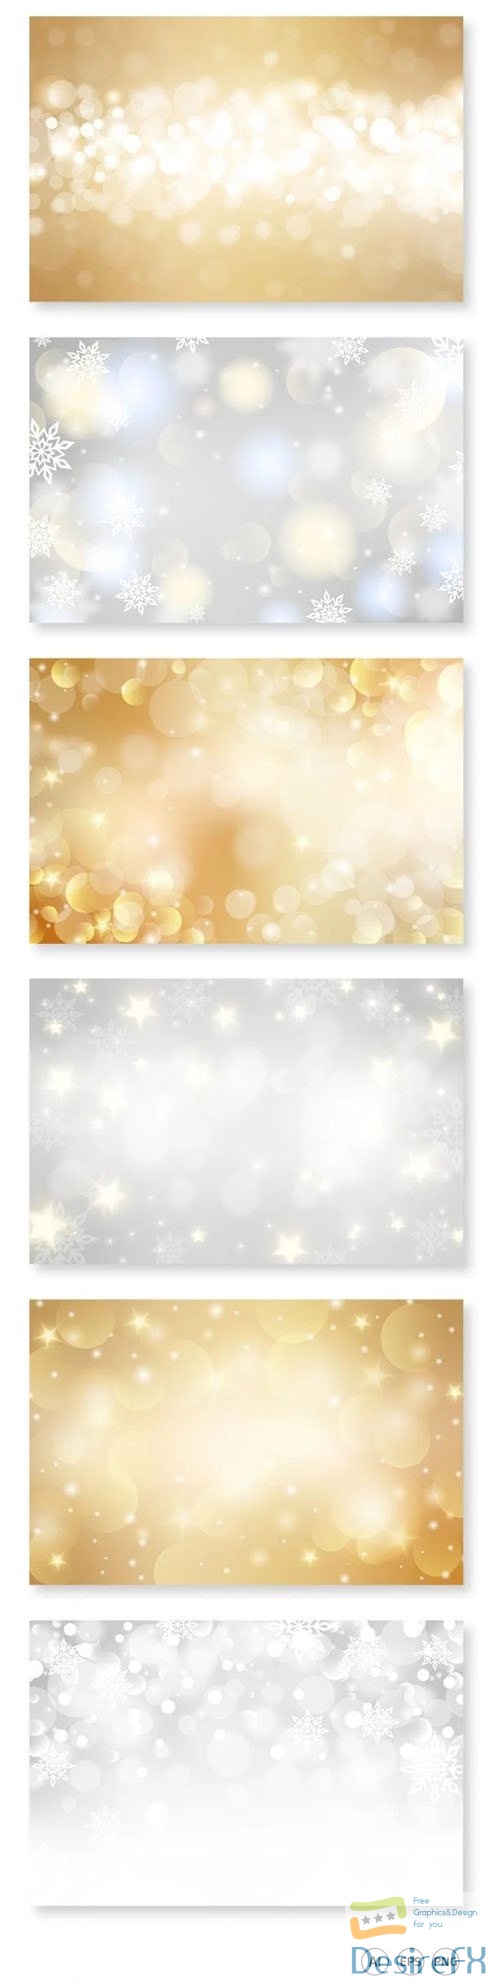 6 Holidays Backgrounds Vector Templates Collection